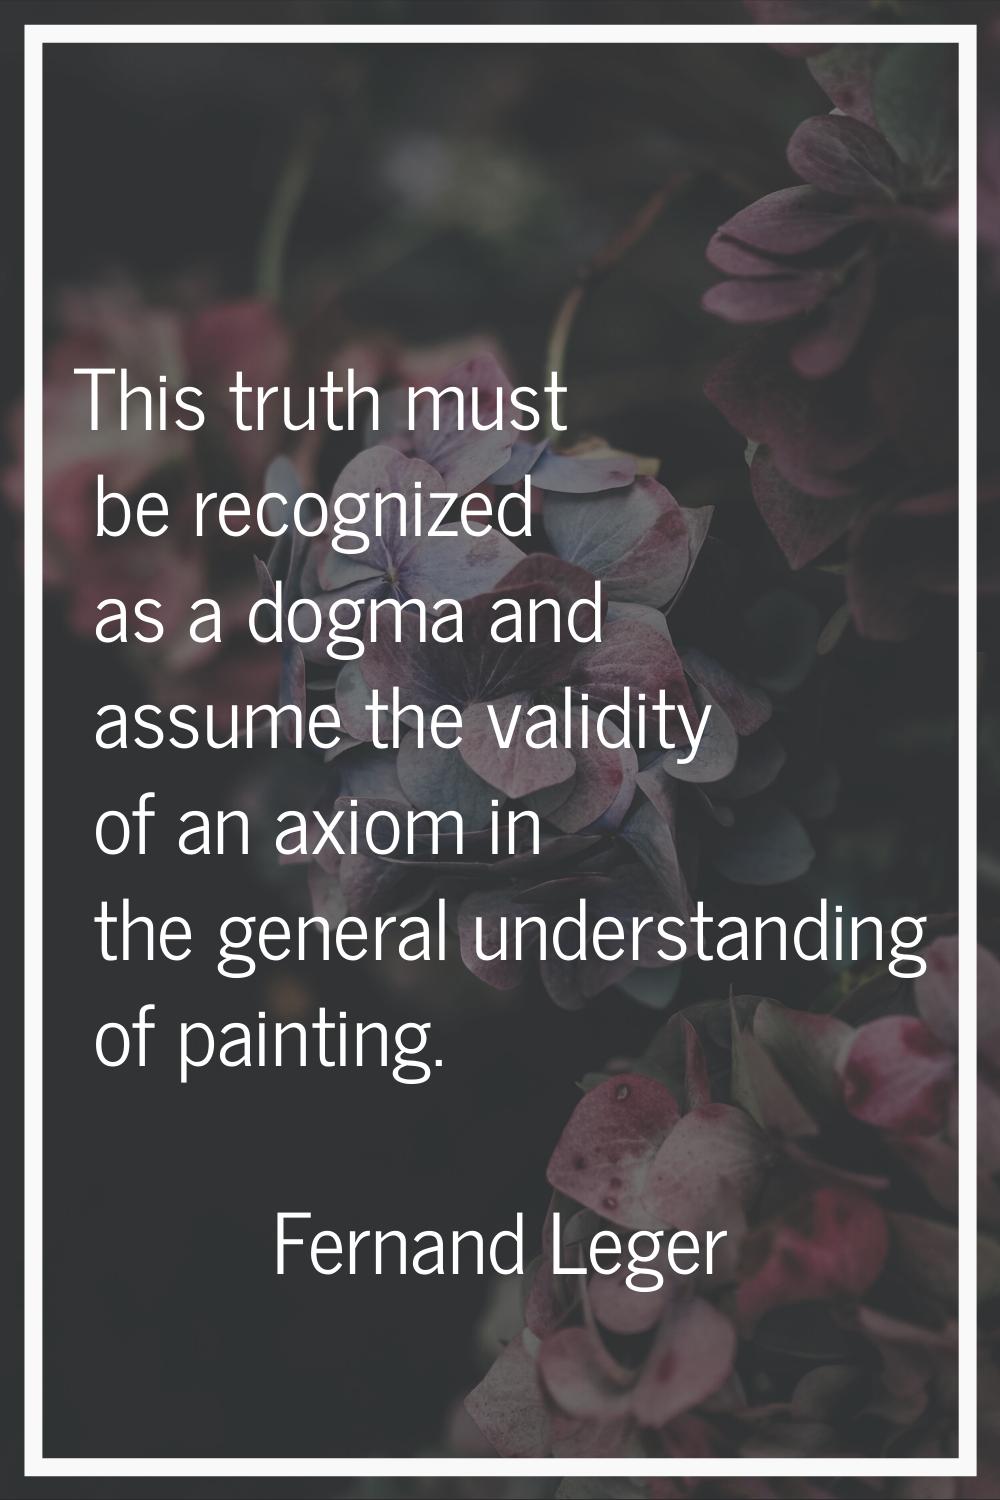 This truth must be recognized as a dogma and assume the validity of an axiom in the general underst